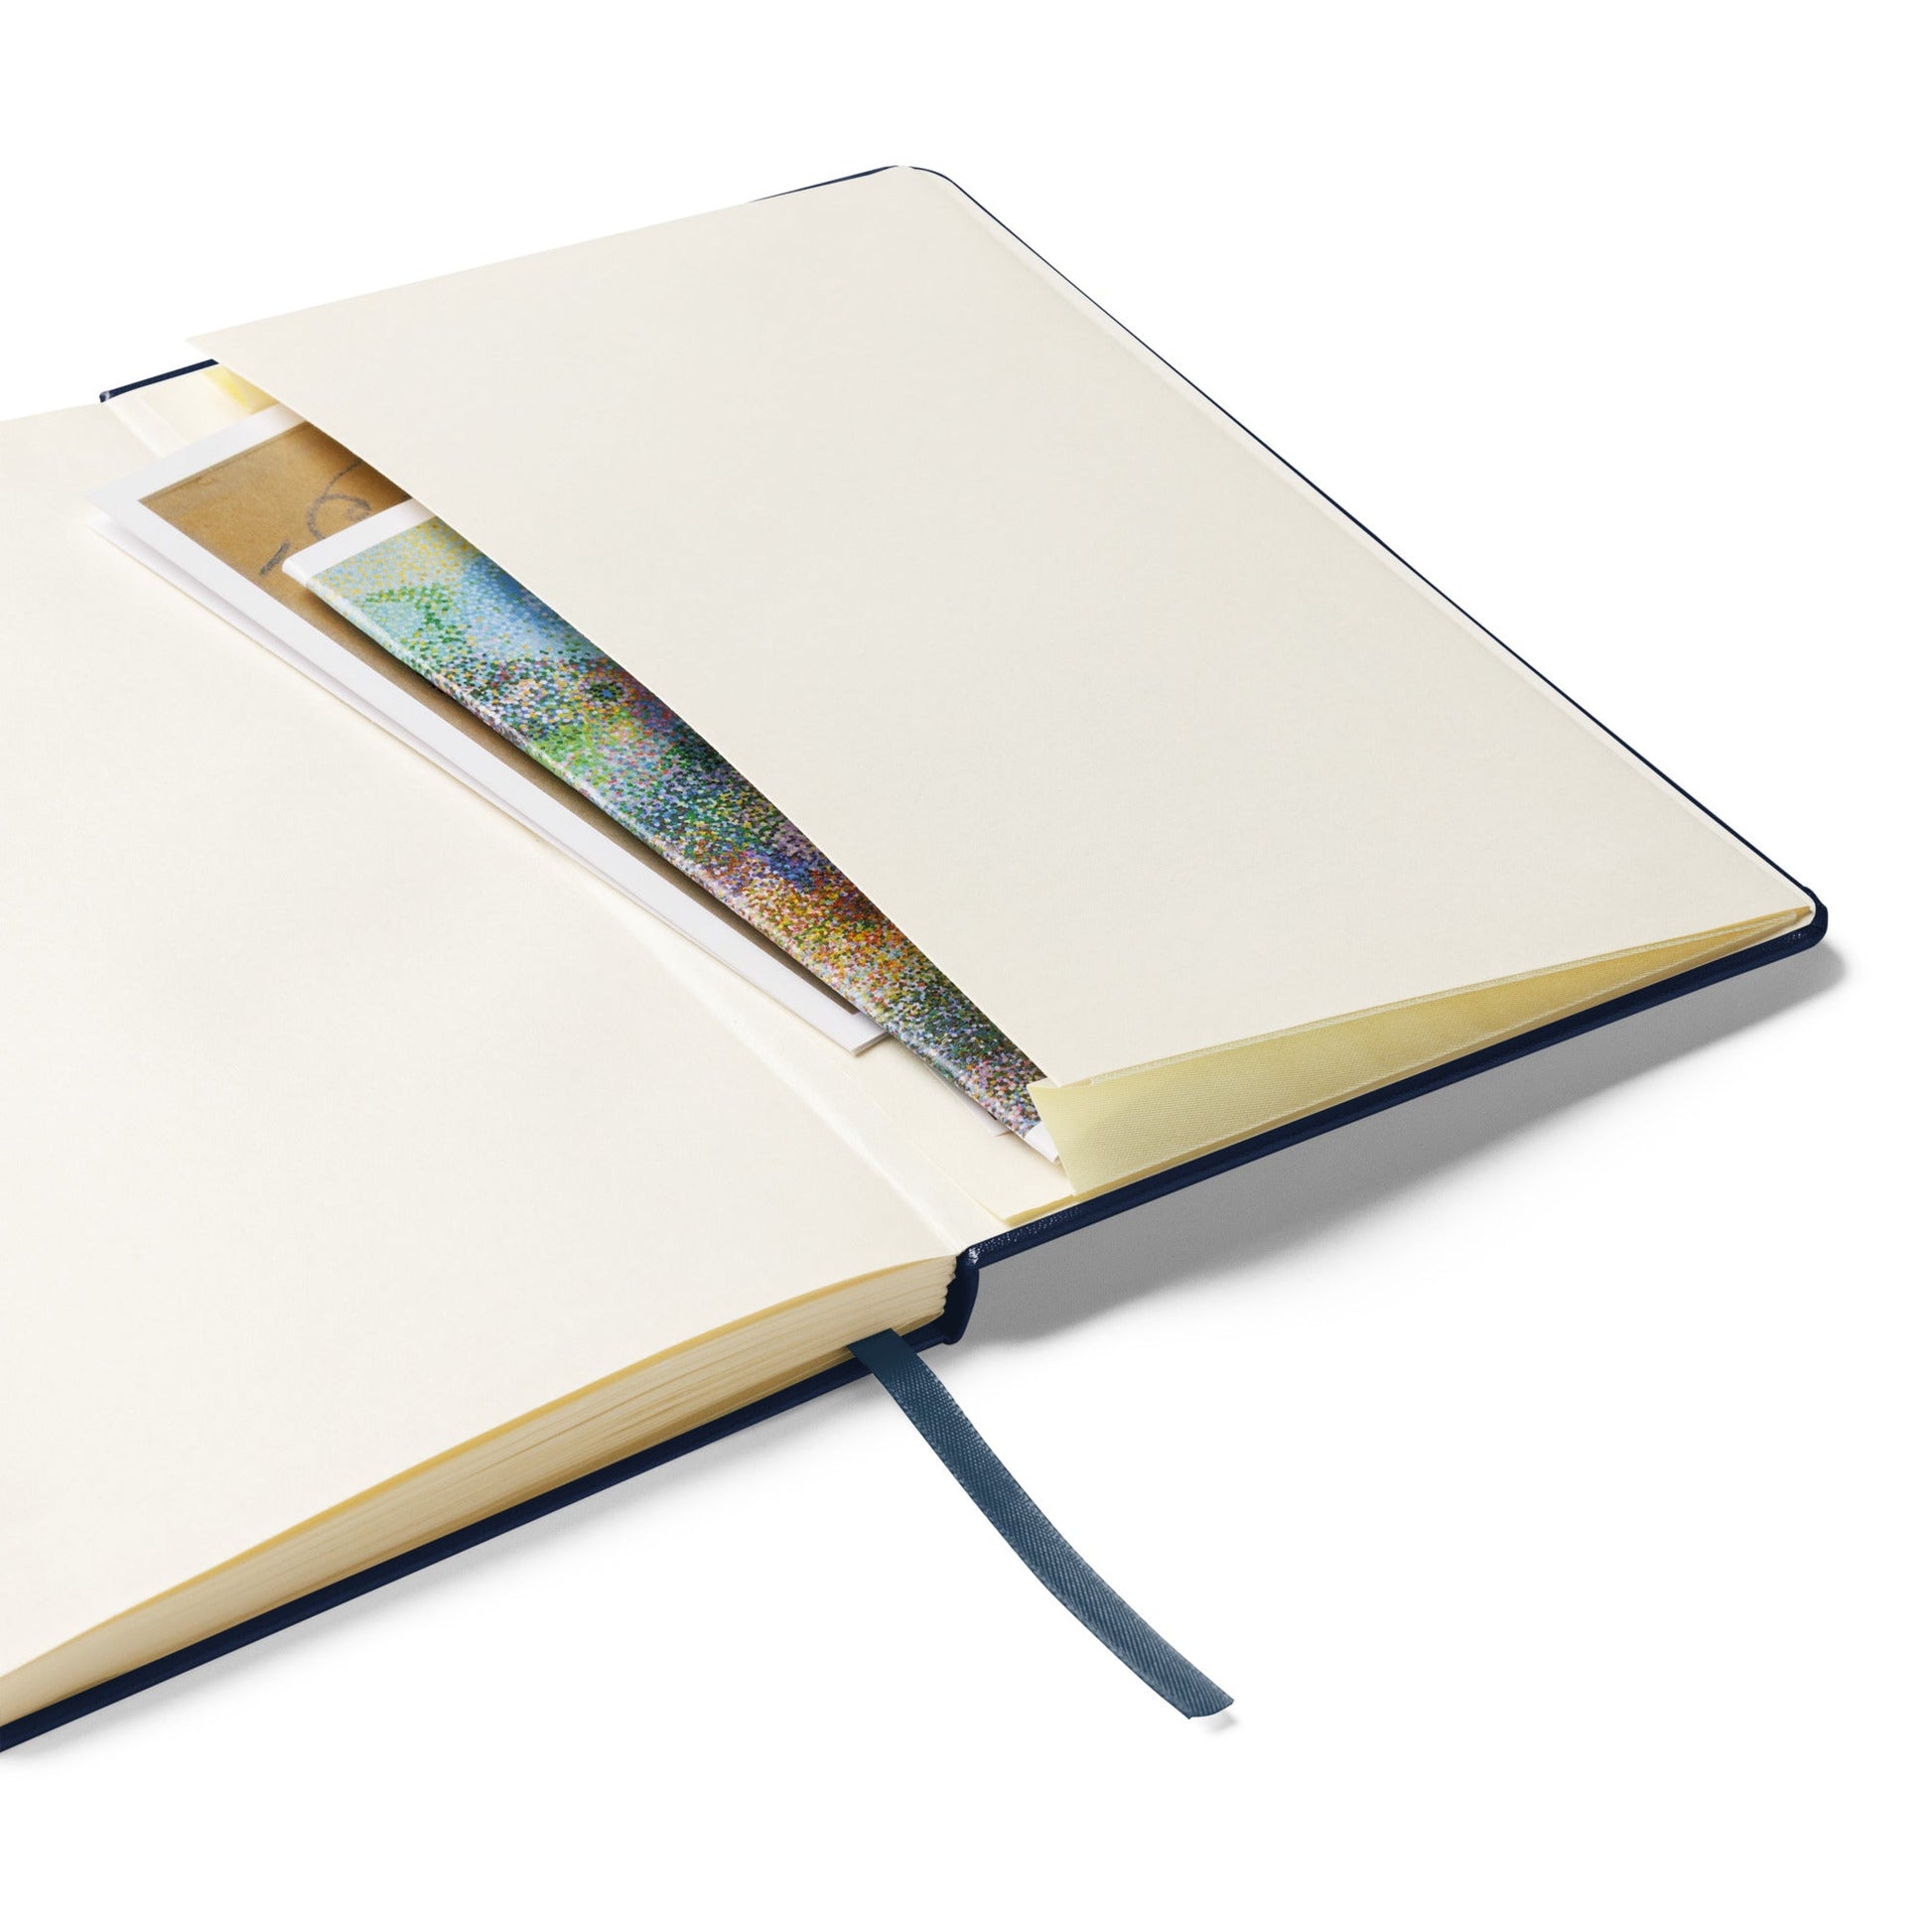 Hardcover bound notebook | ISF | Flat Eden Society - Spectral Ink Shop - Notebooks & Notepads -8616232_16955